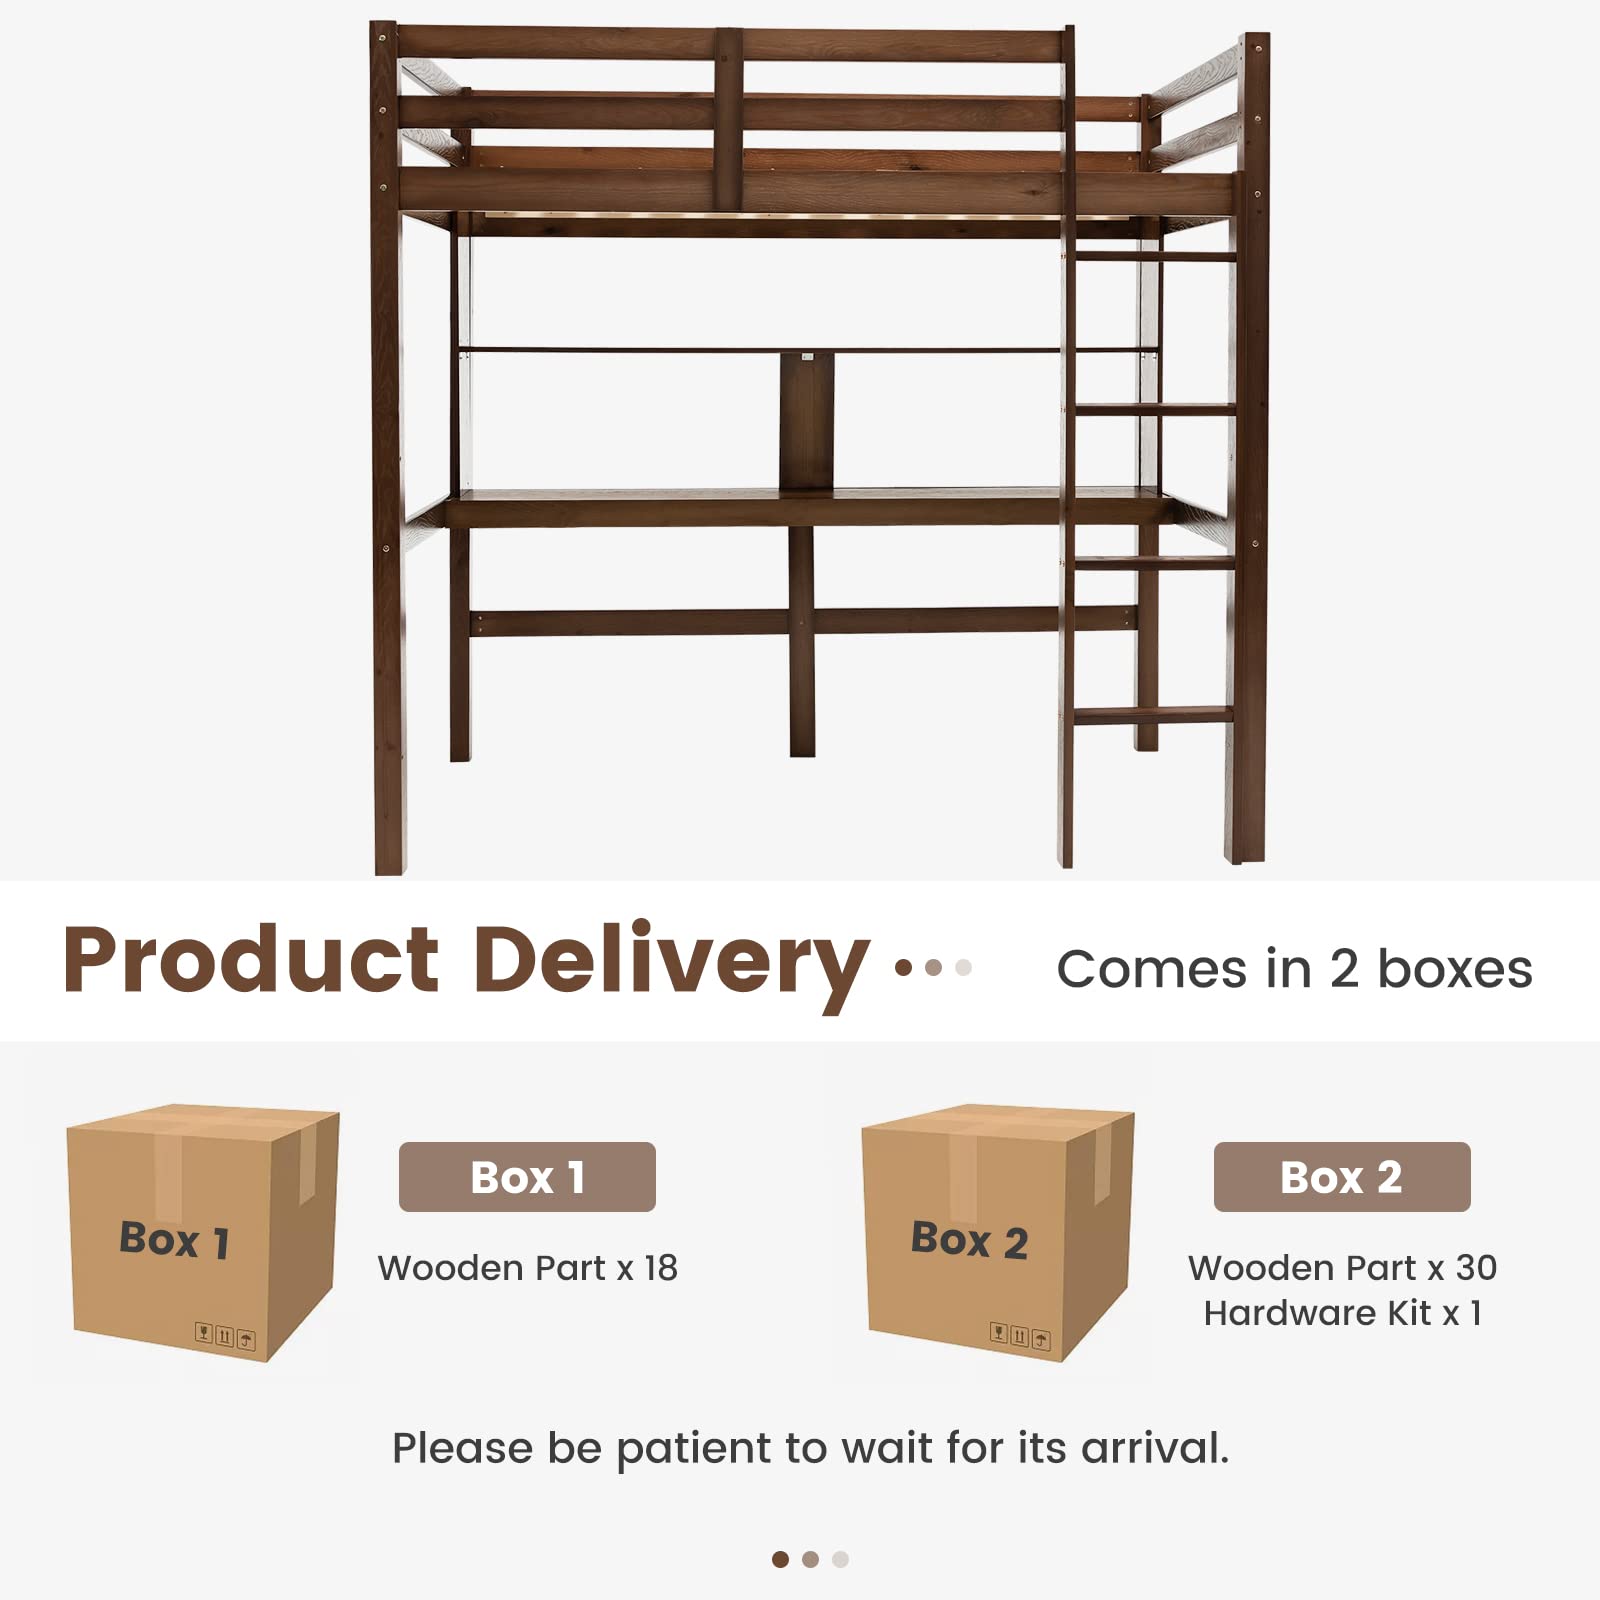 Giantex Twin Loft Bed with Desk and Bookshelf, Wooden Bed Frame with Safety Guardrail & Ladder